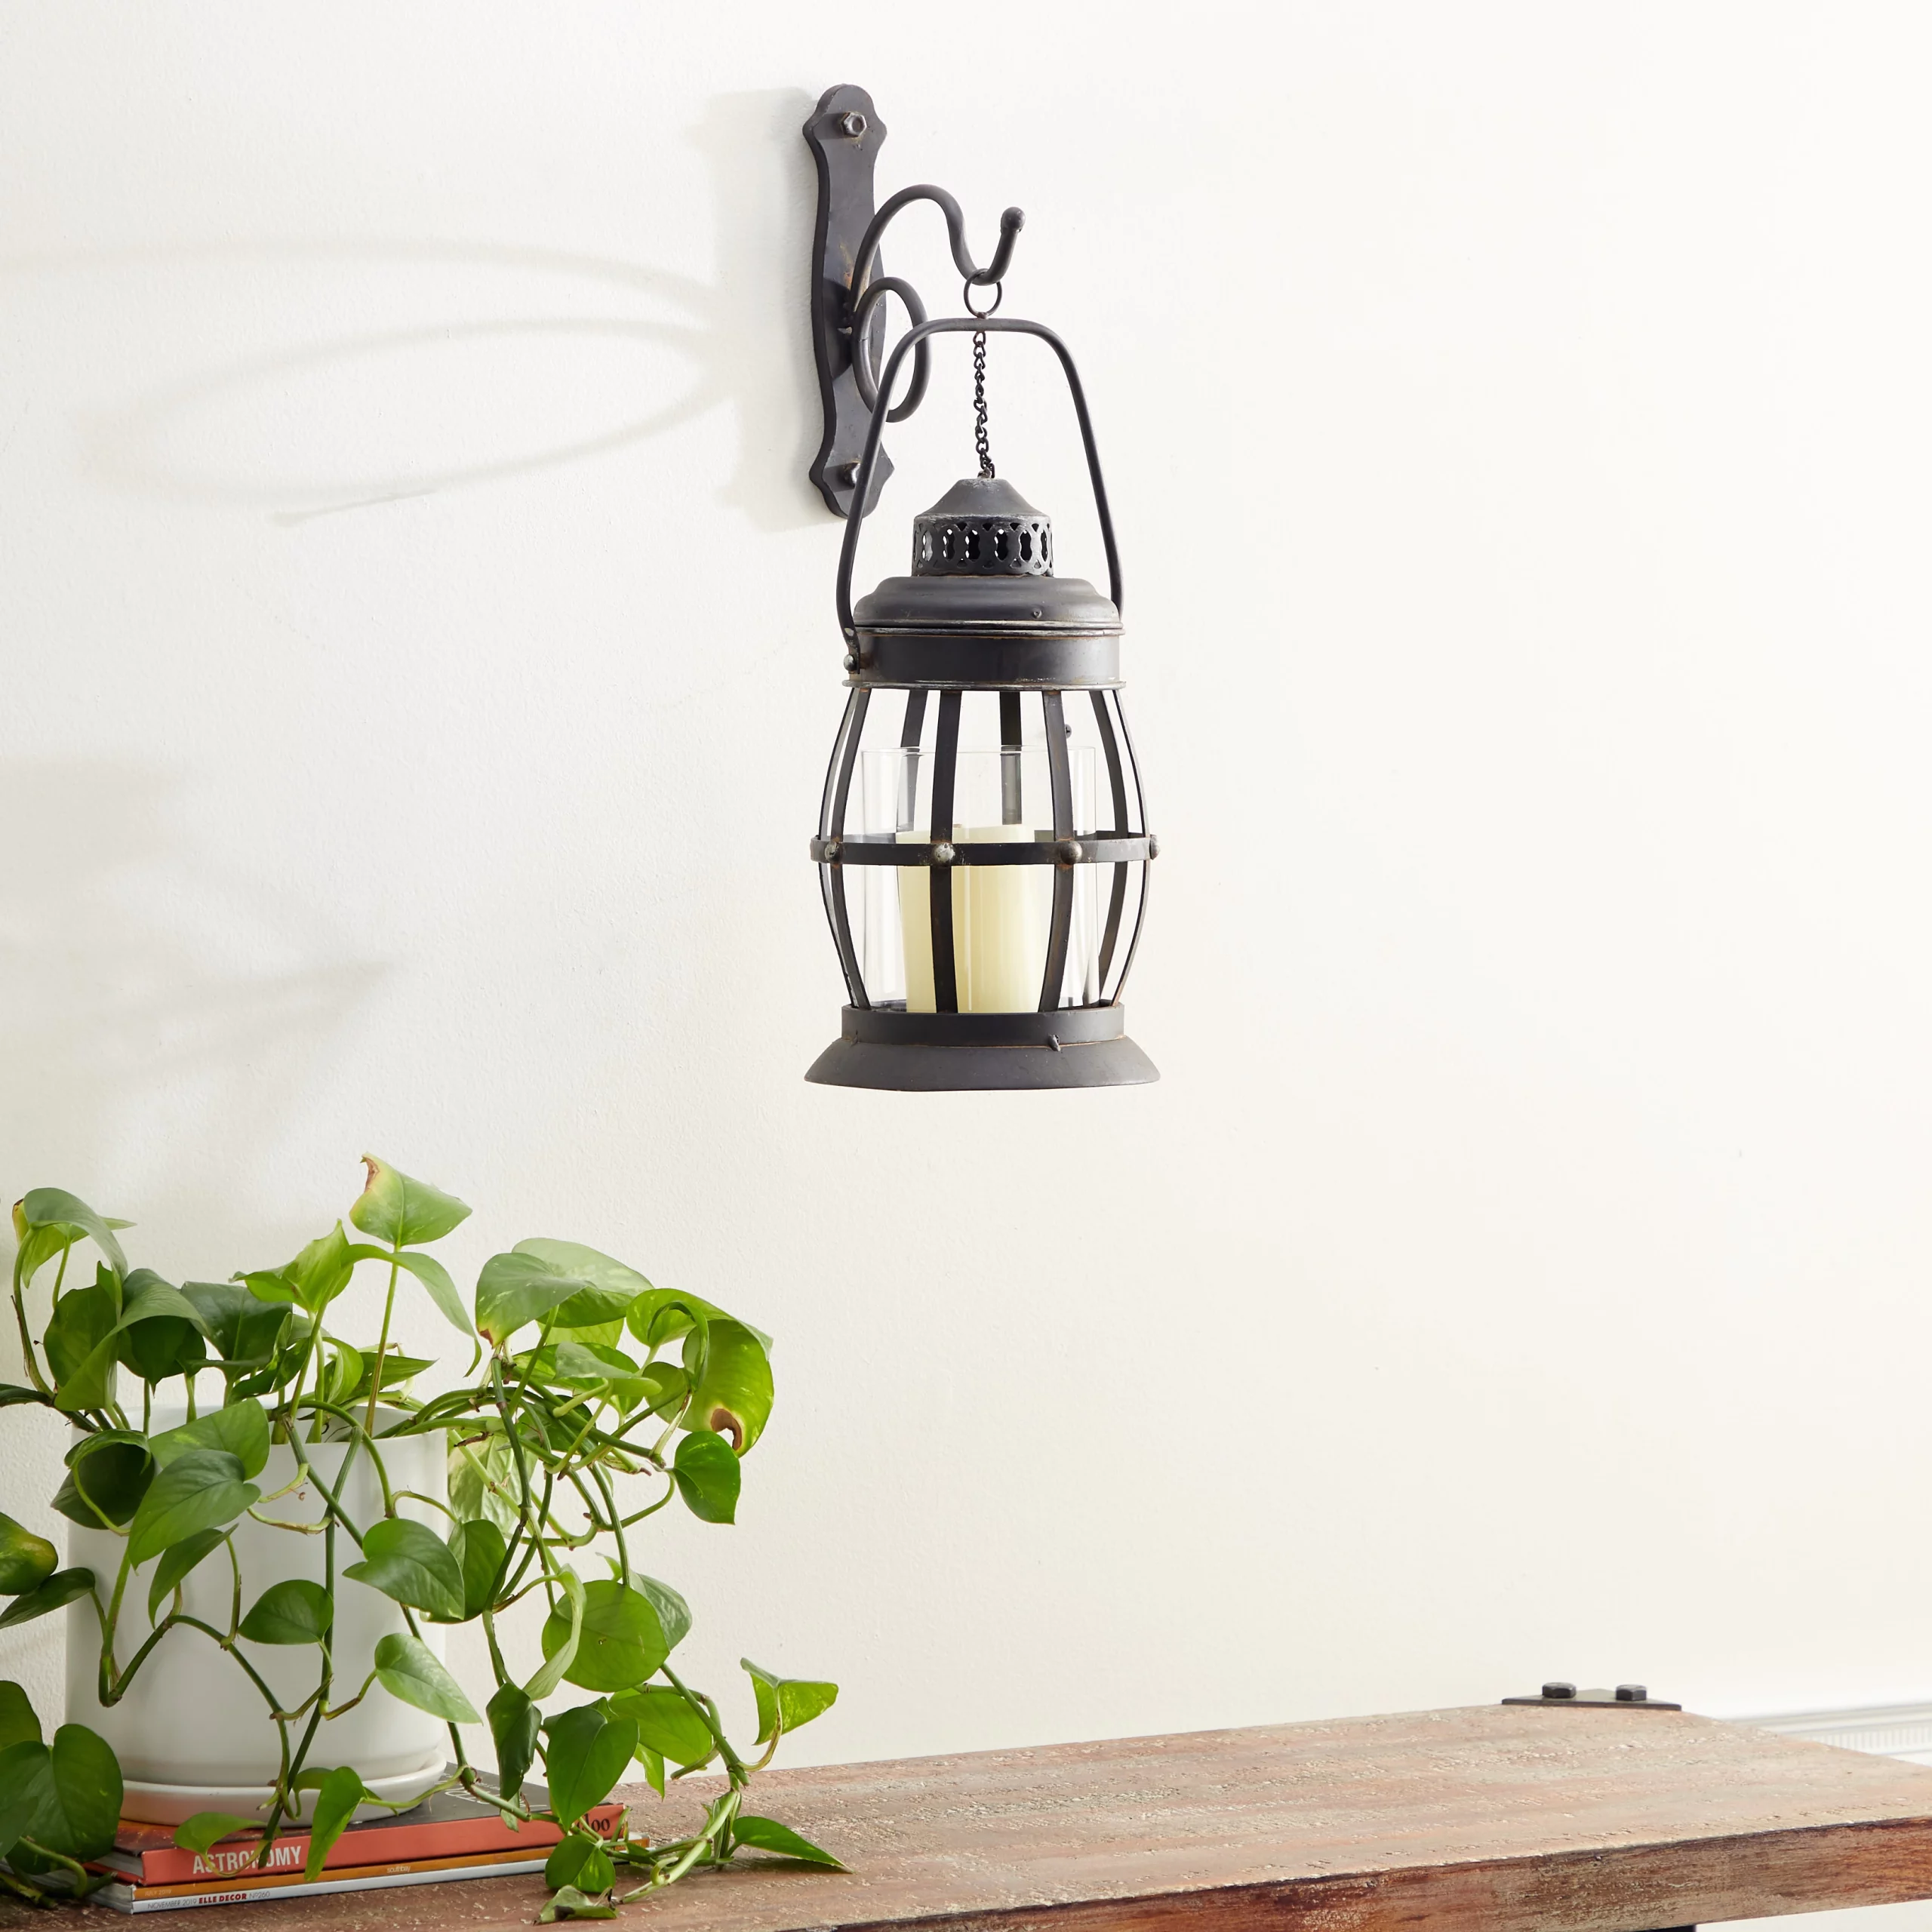 Add a Wall Sconce to Your Design